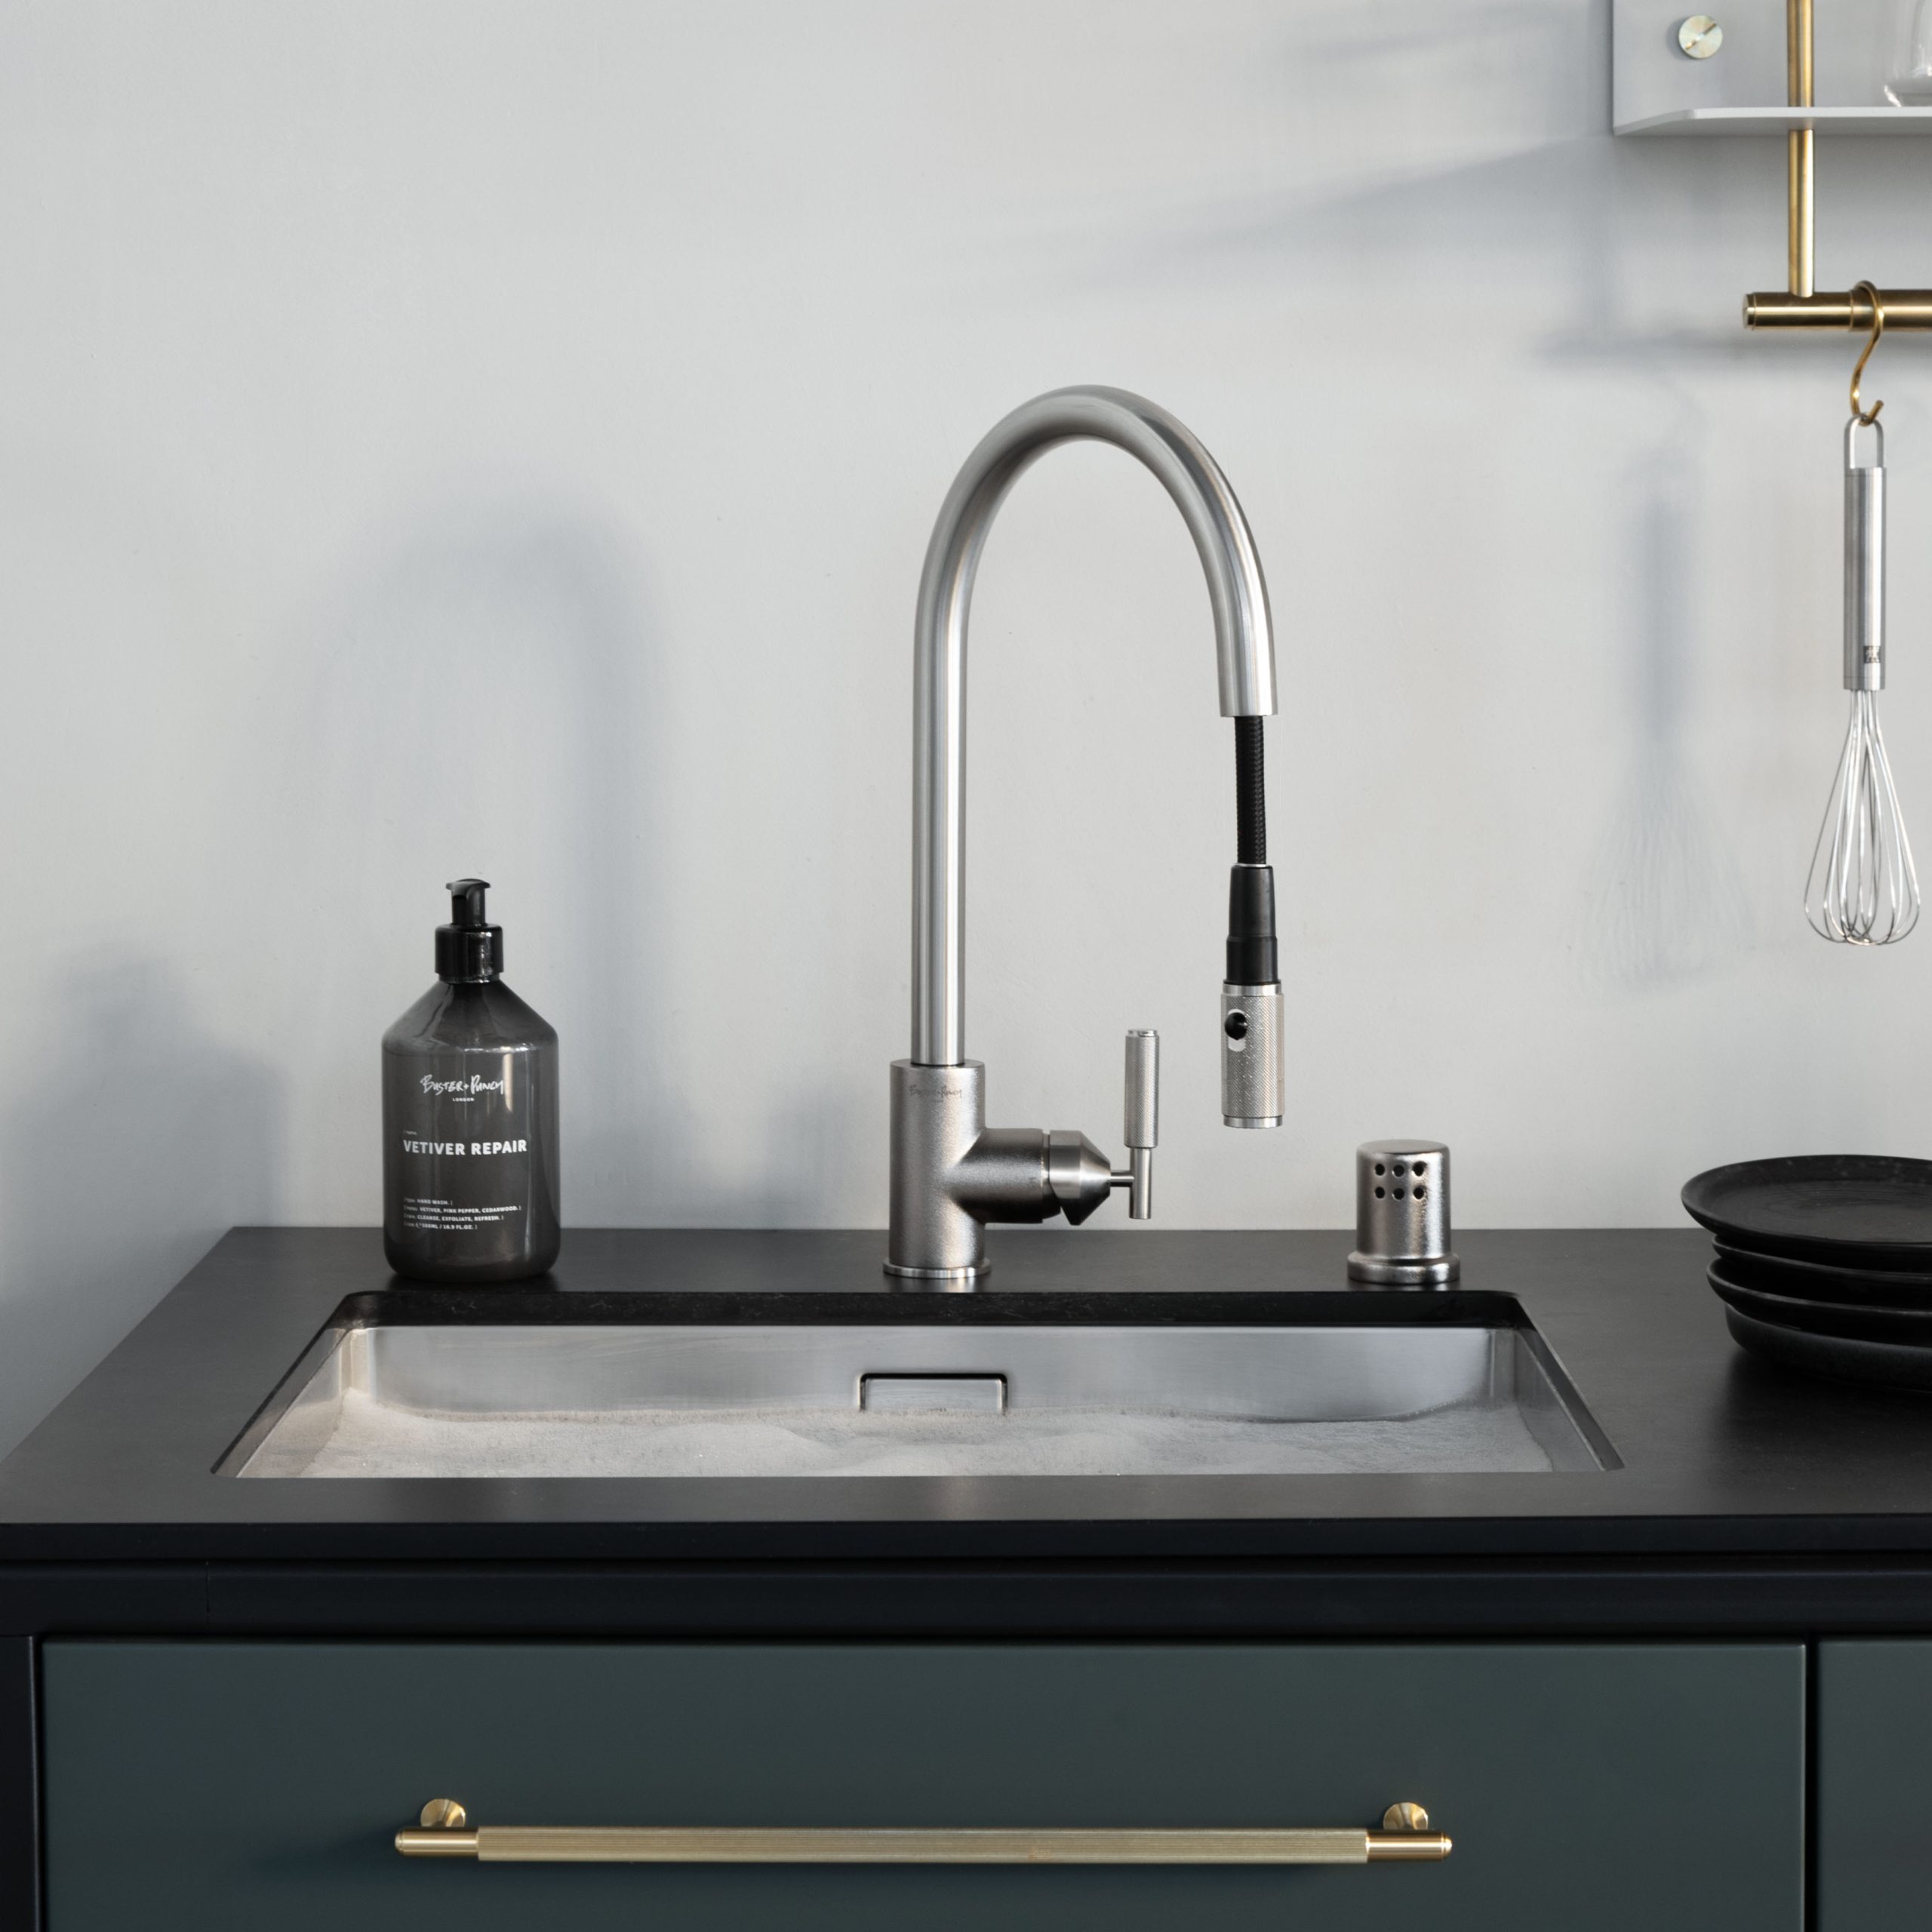 KITCHEN FAUCET / DUAL-SPRAY PULL-OUT MIXER / CROSS / BRASS